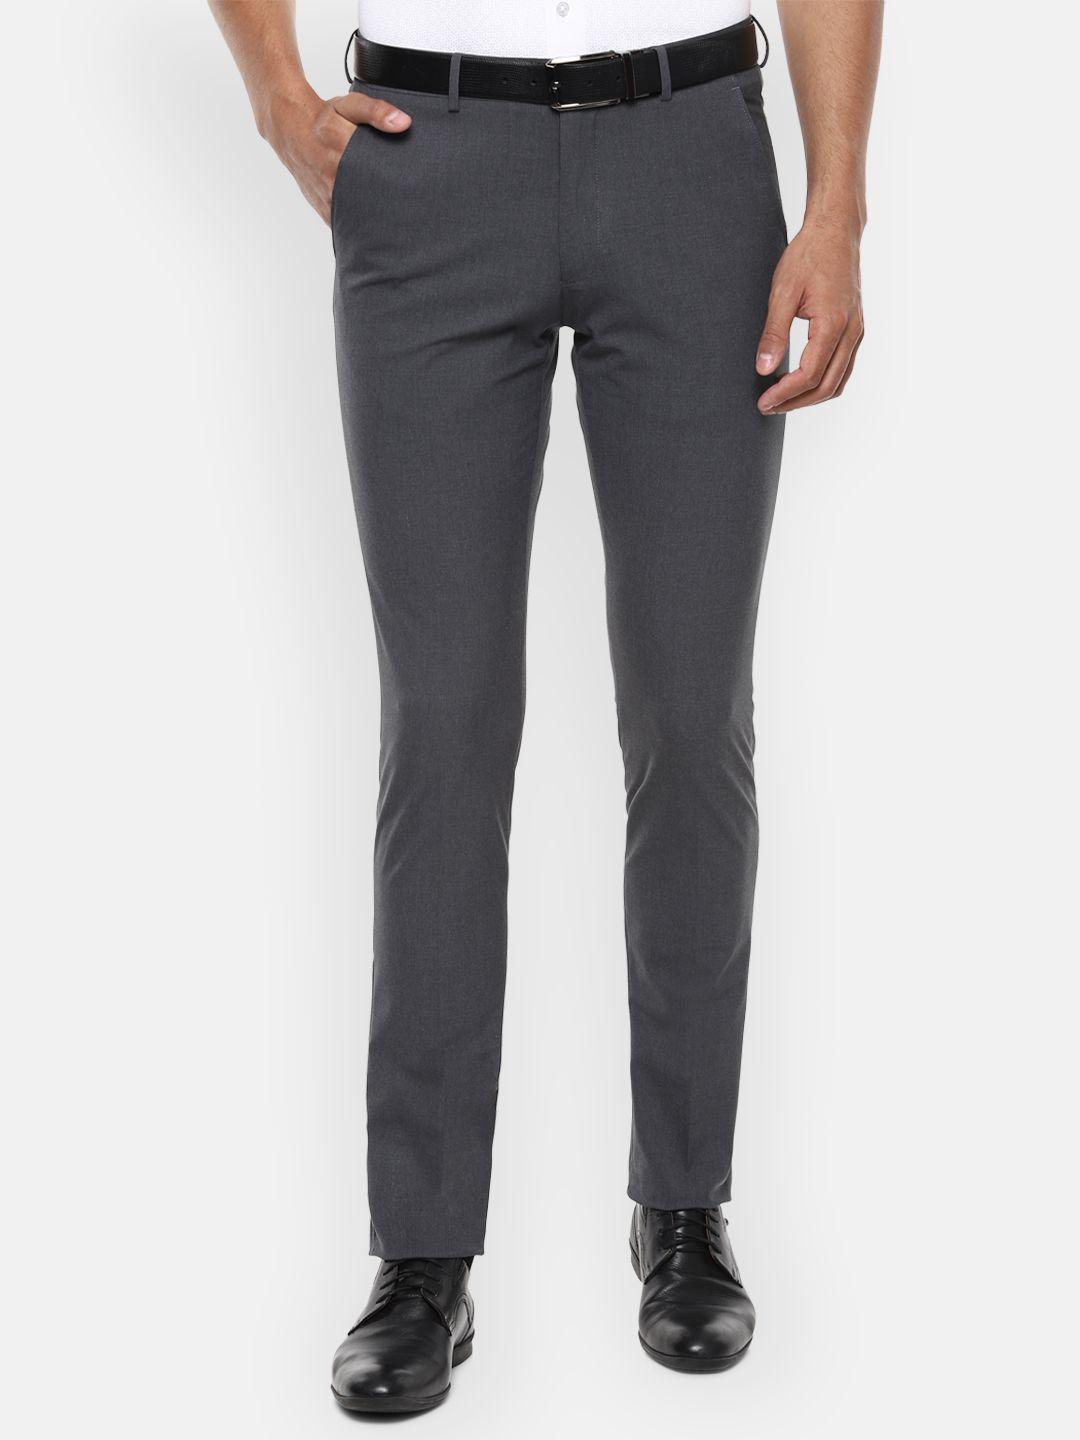 louis philippe men grey textured skinny fit trousers